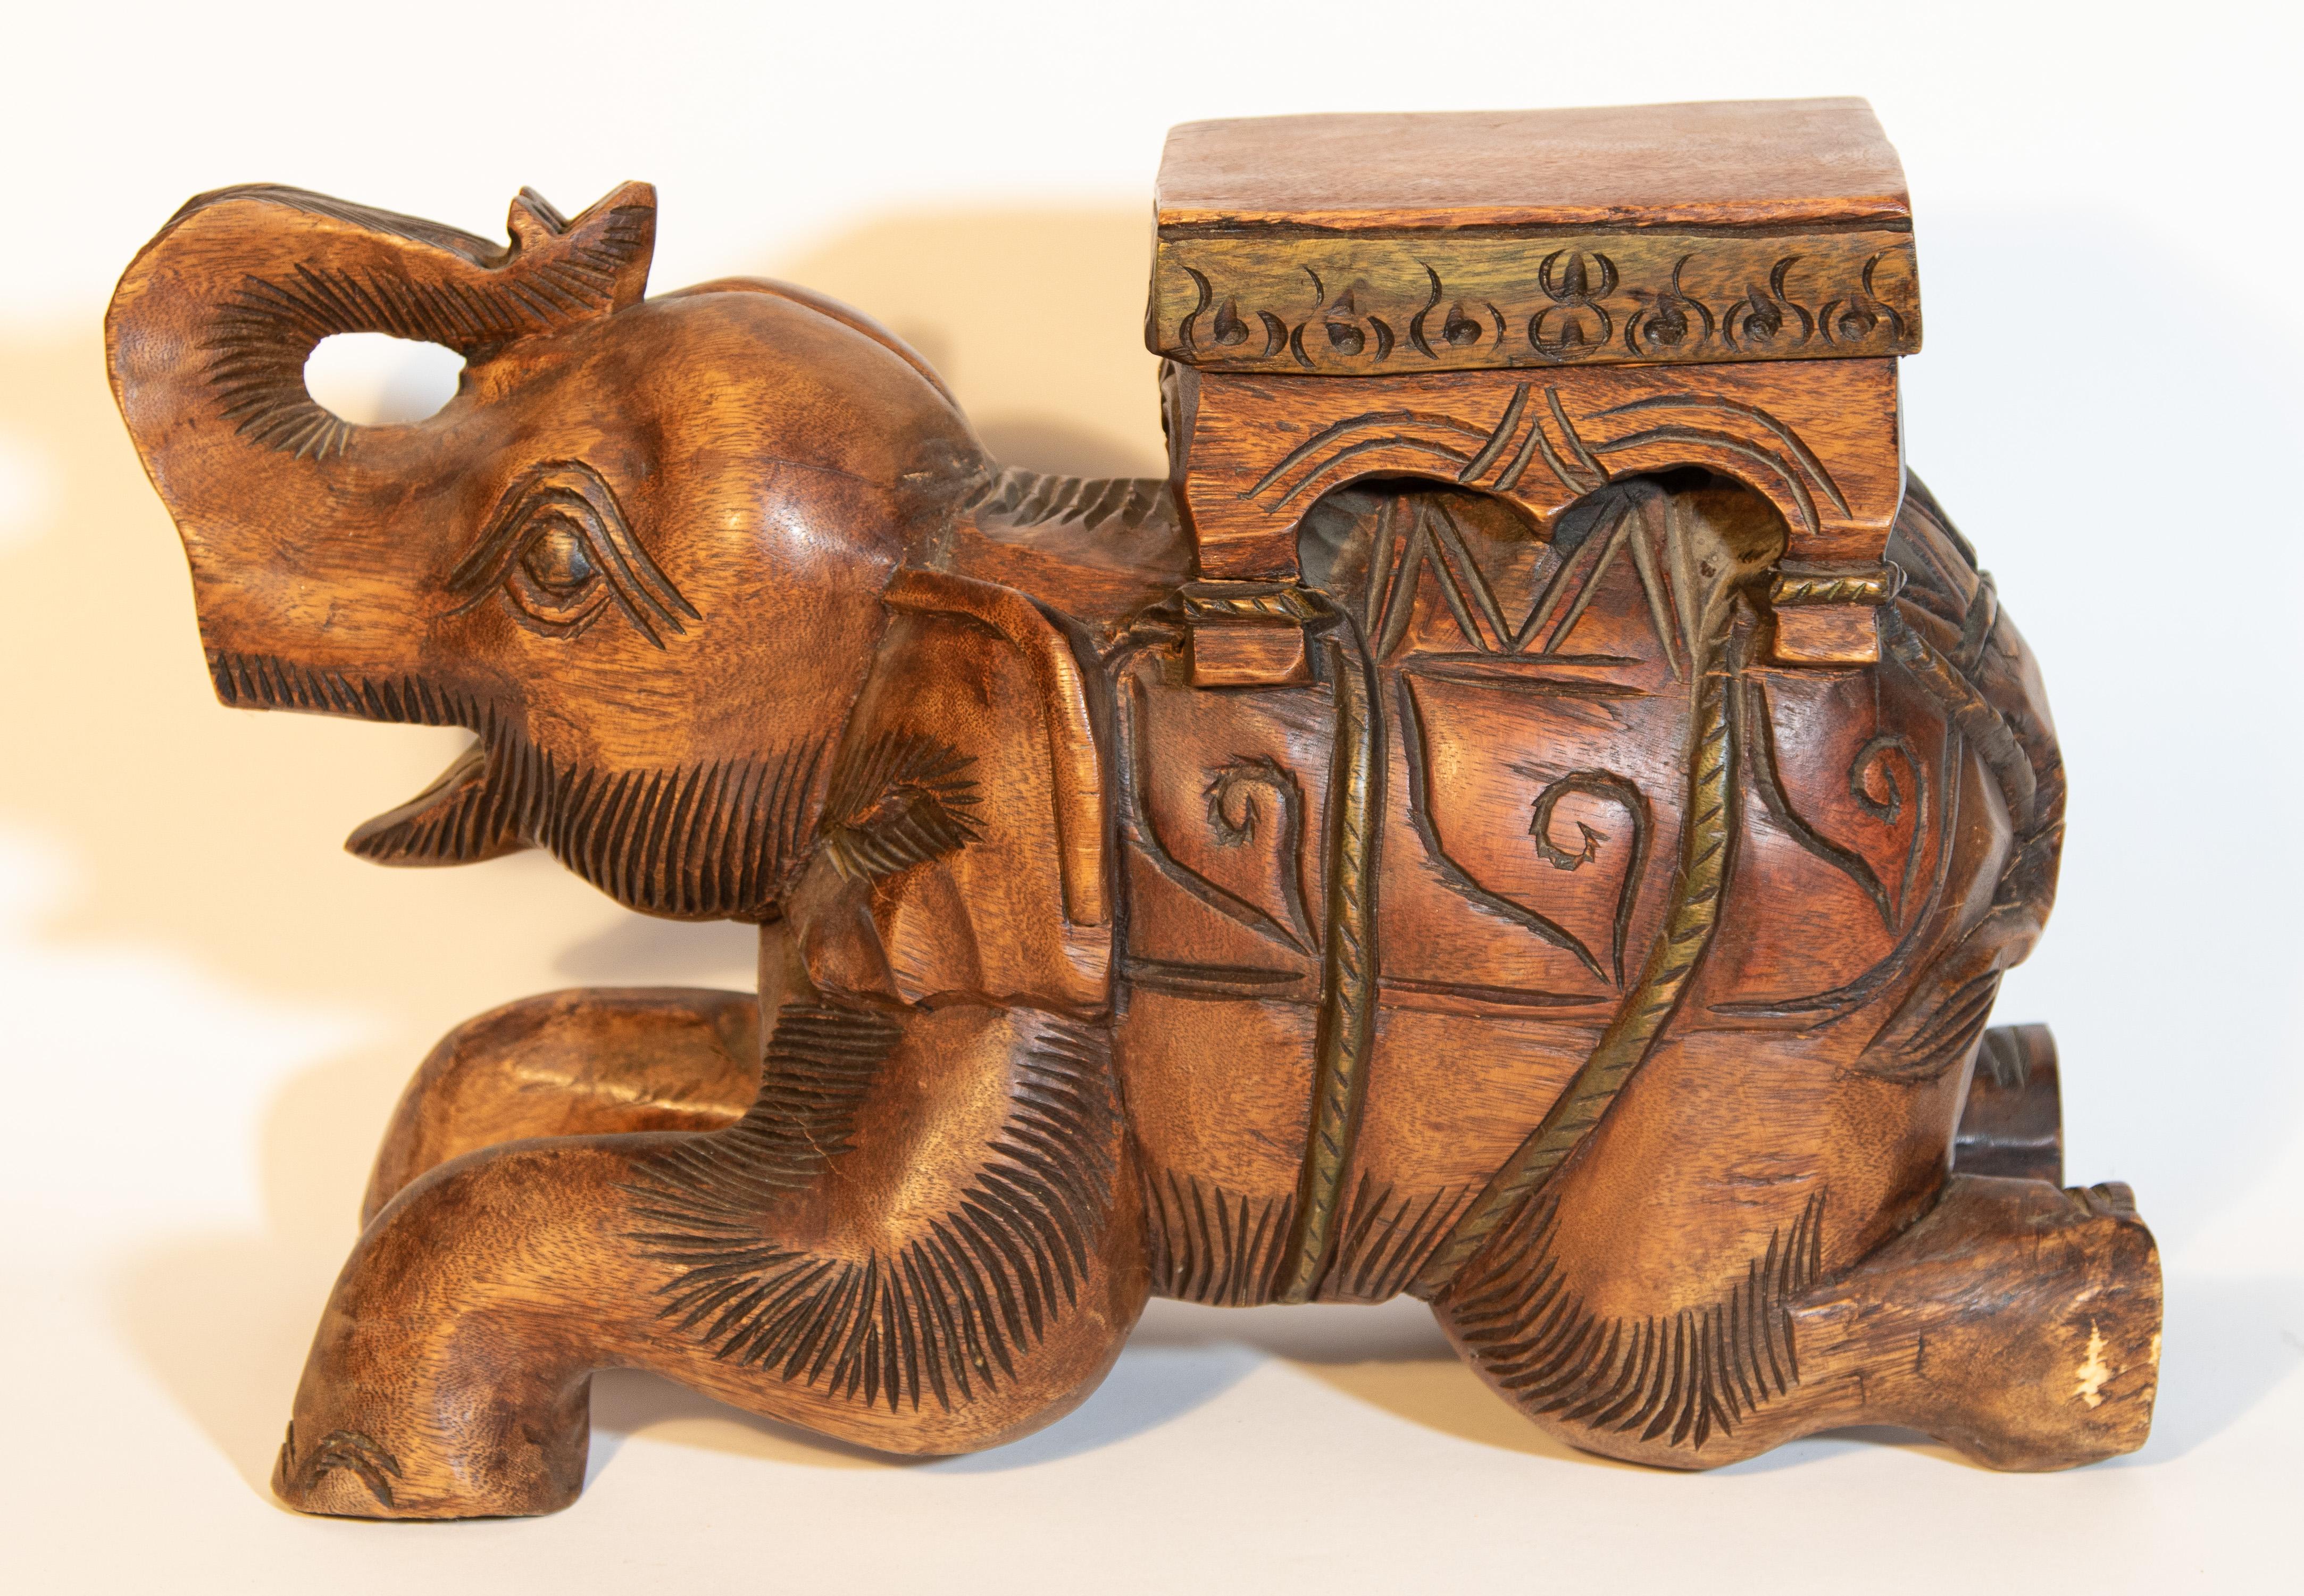 Hand-carved vintage wooden South Asian elephant stool, or side table, very nice hand-carved on one piece of wood.
Could be used as side table, with a piece of glass or plant stand.
Artfully hand-carved wood drink side table in elephant